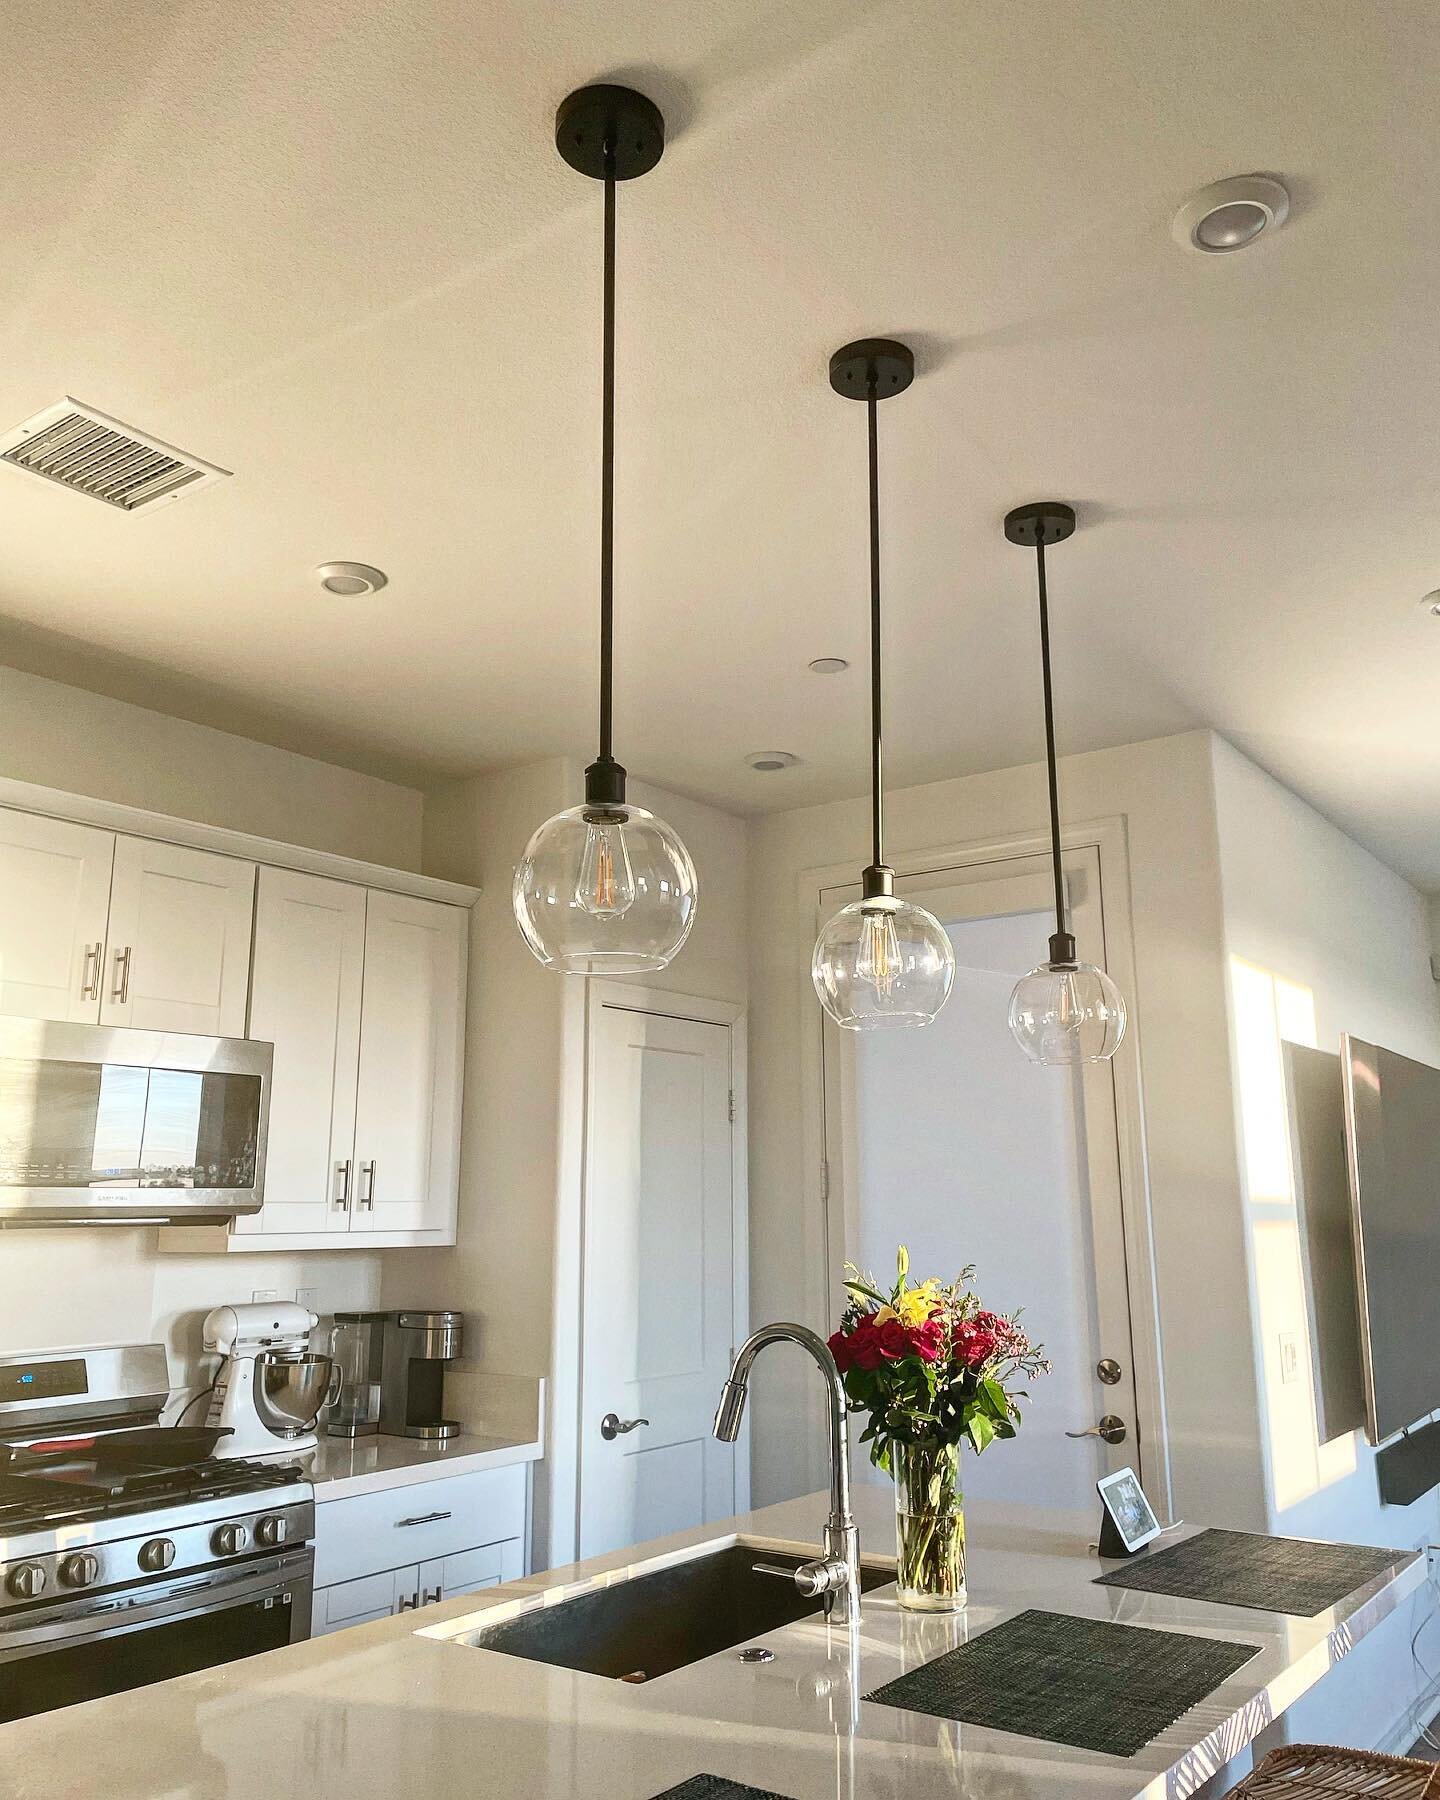 So happy to see these custom pendants we did for @gina_dolce.vita in San Diego. They look fantastic in your new kitchen! 

Happy clients make my job even sweeter. Thank you!! 

#customlighting #lightingdesignersantacruz #lightingdesignercalifornia #l